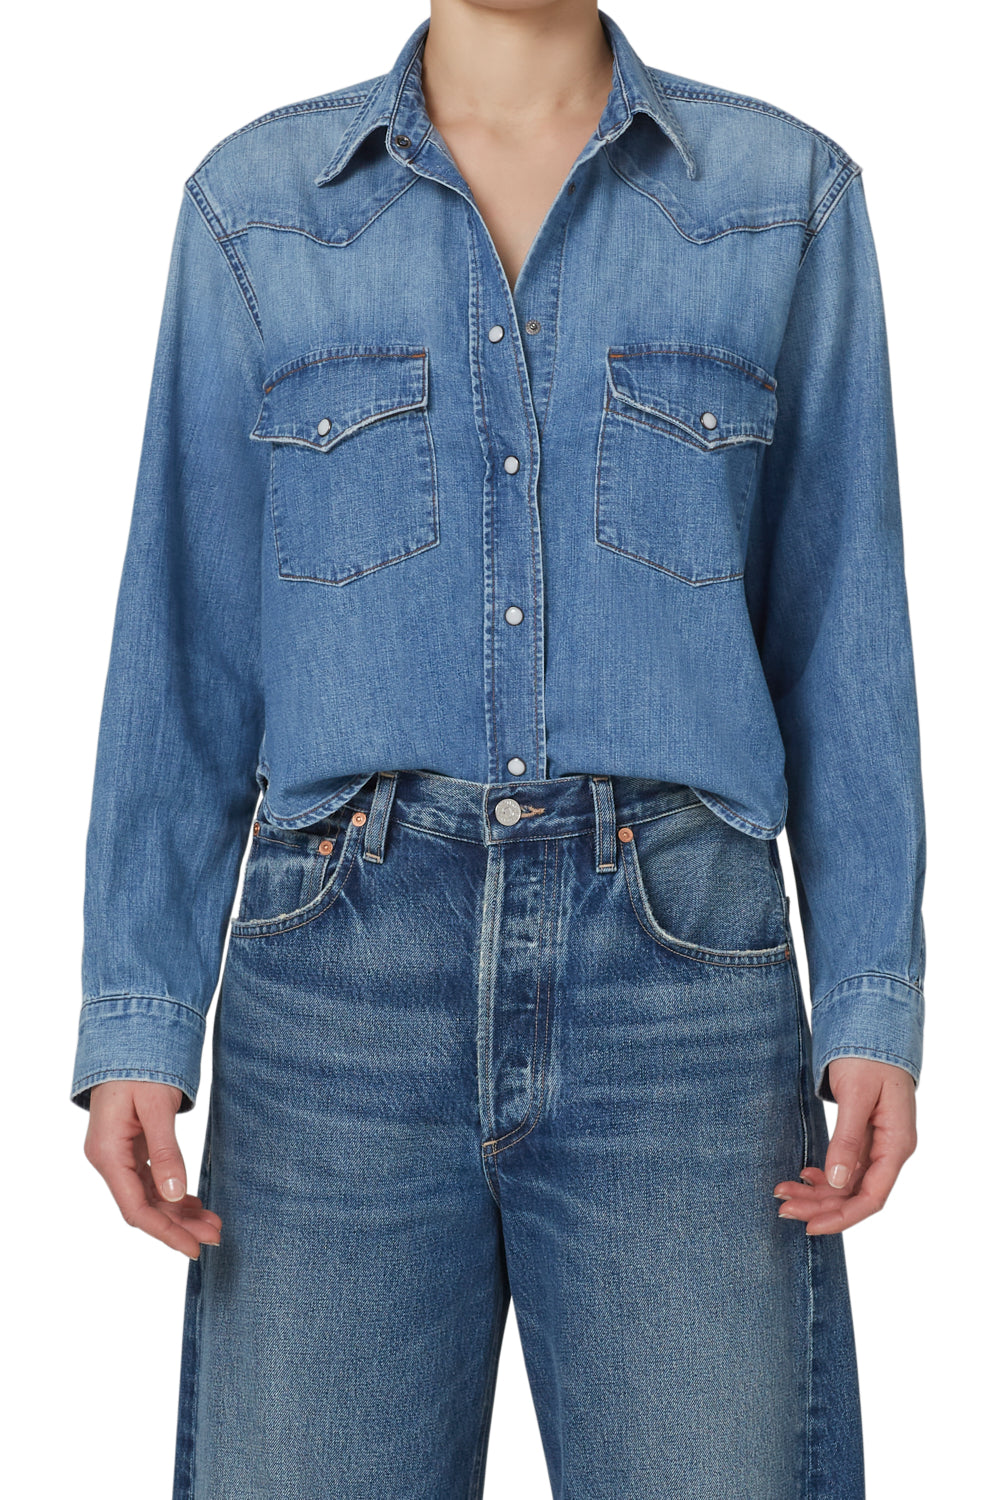 Citizens of Humanity - Cropped Western Shirt in Carolina Blue